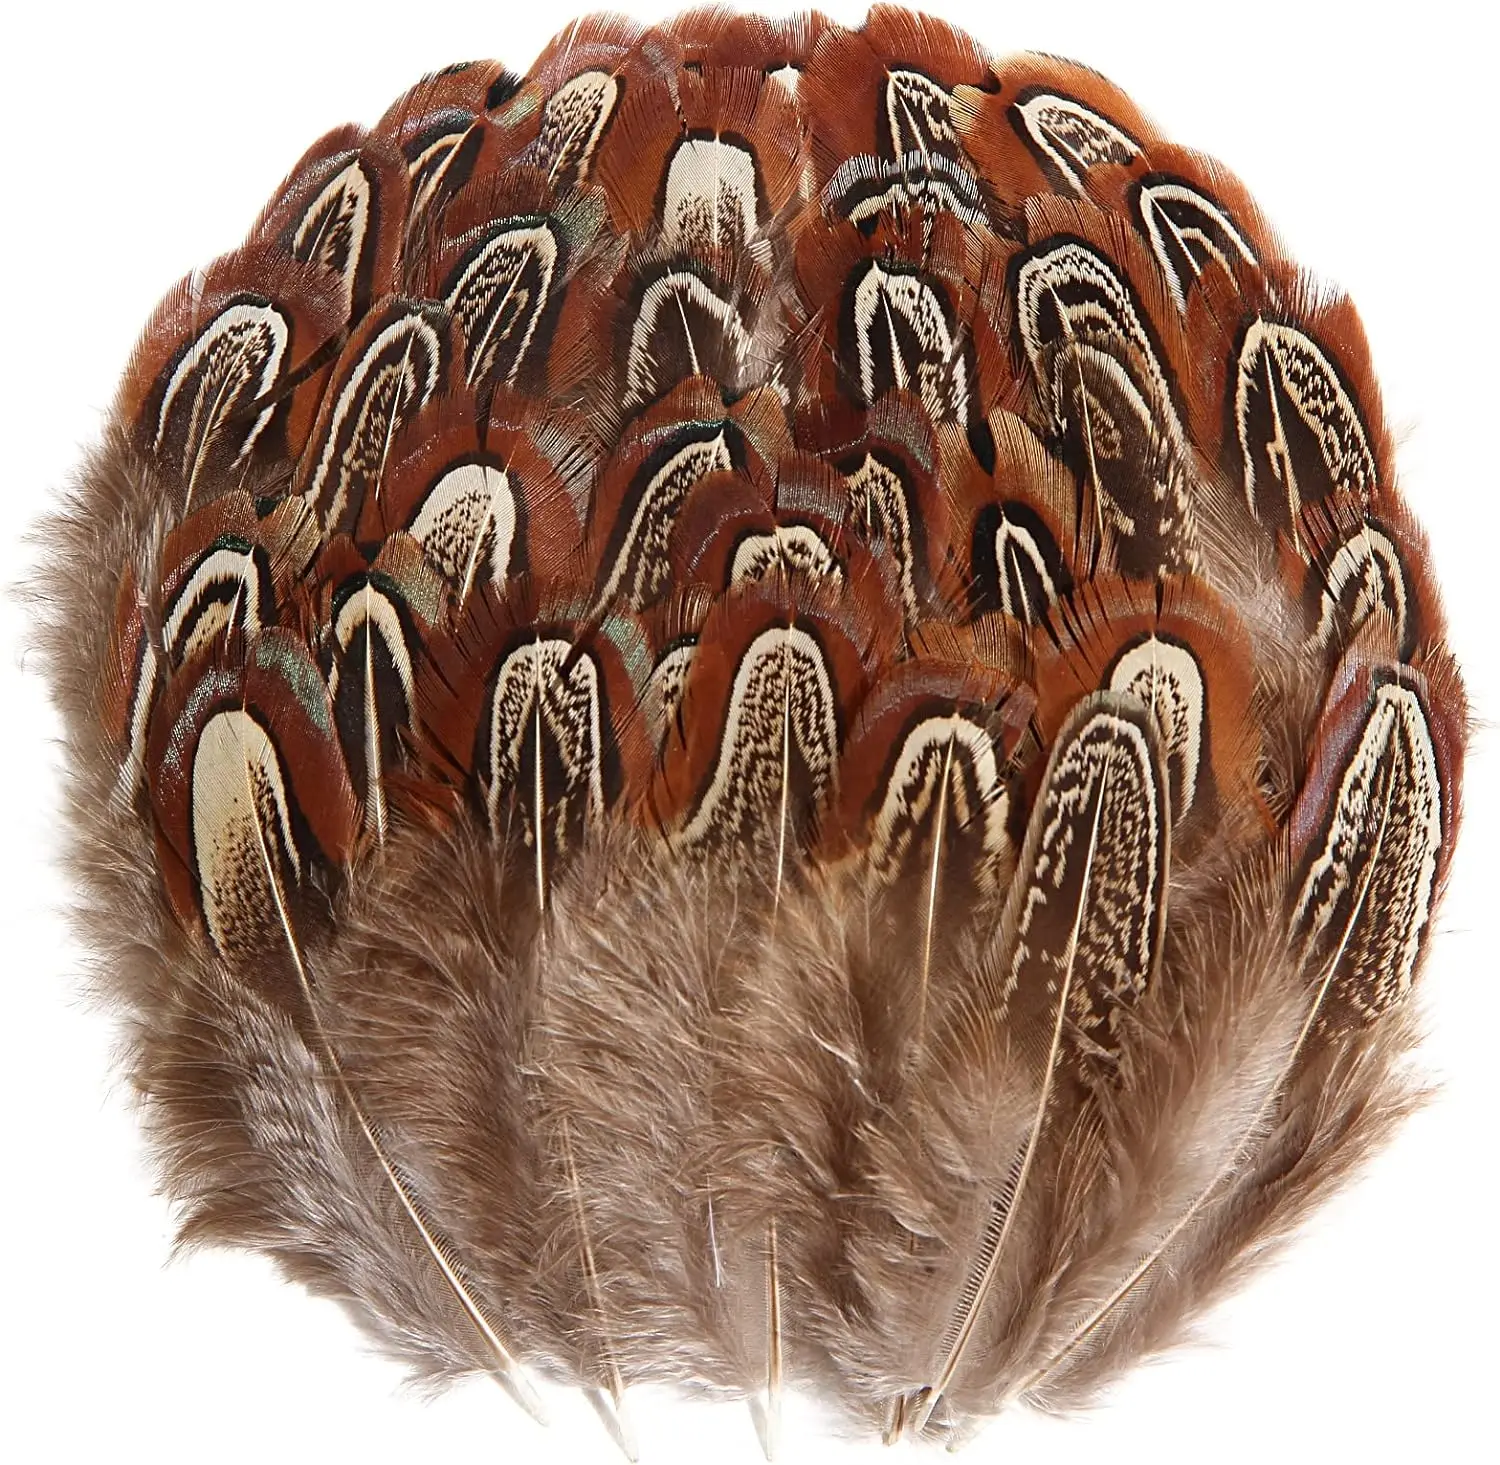 

Natural Pheasant Feathers 100pcs 2-3 Inch Thanksgiving Crafts Hats Sewing Clothing Wedding Dream Catcher Decoration Feather